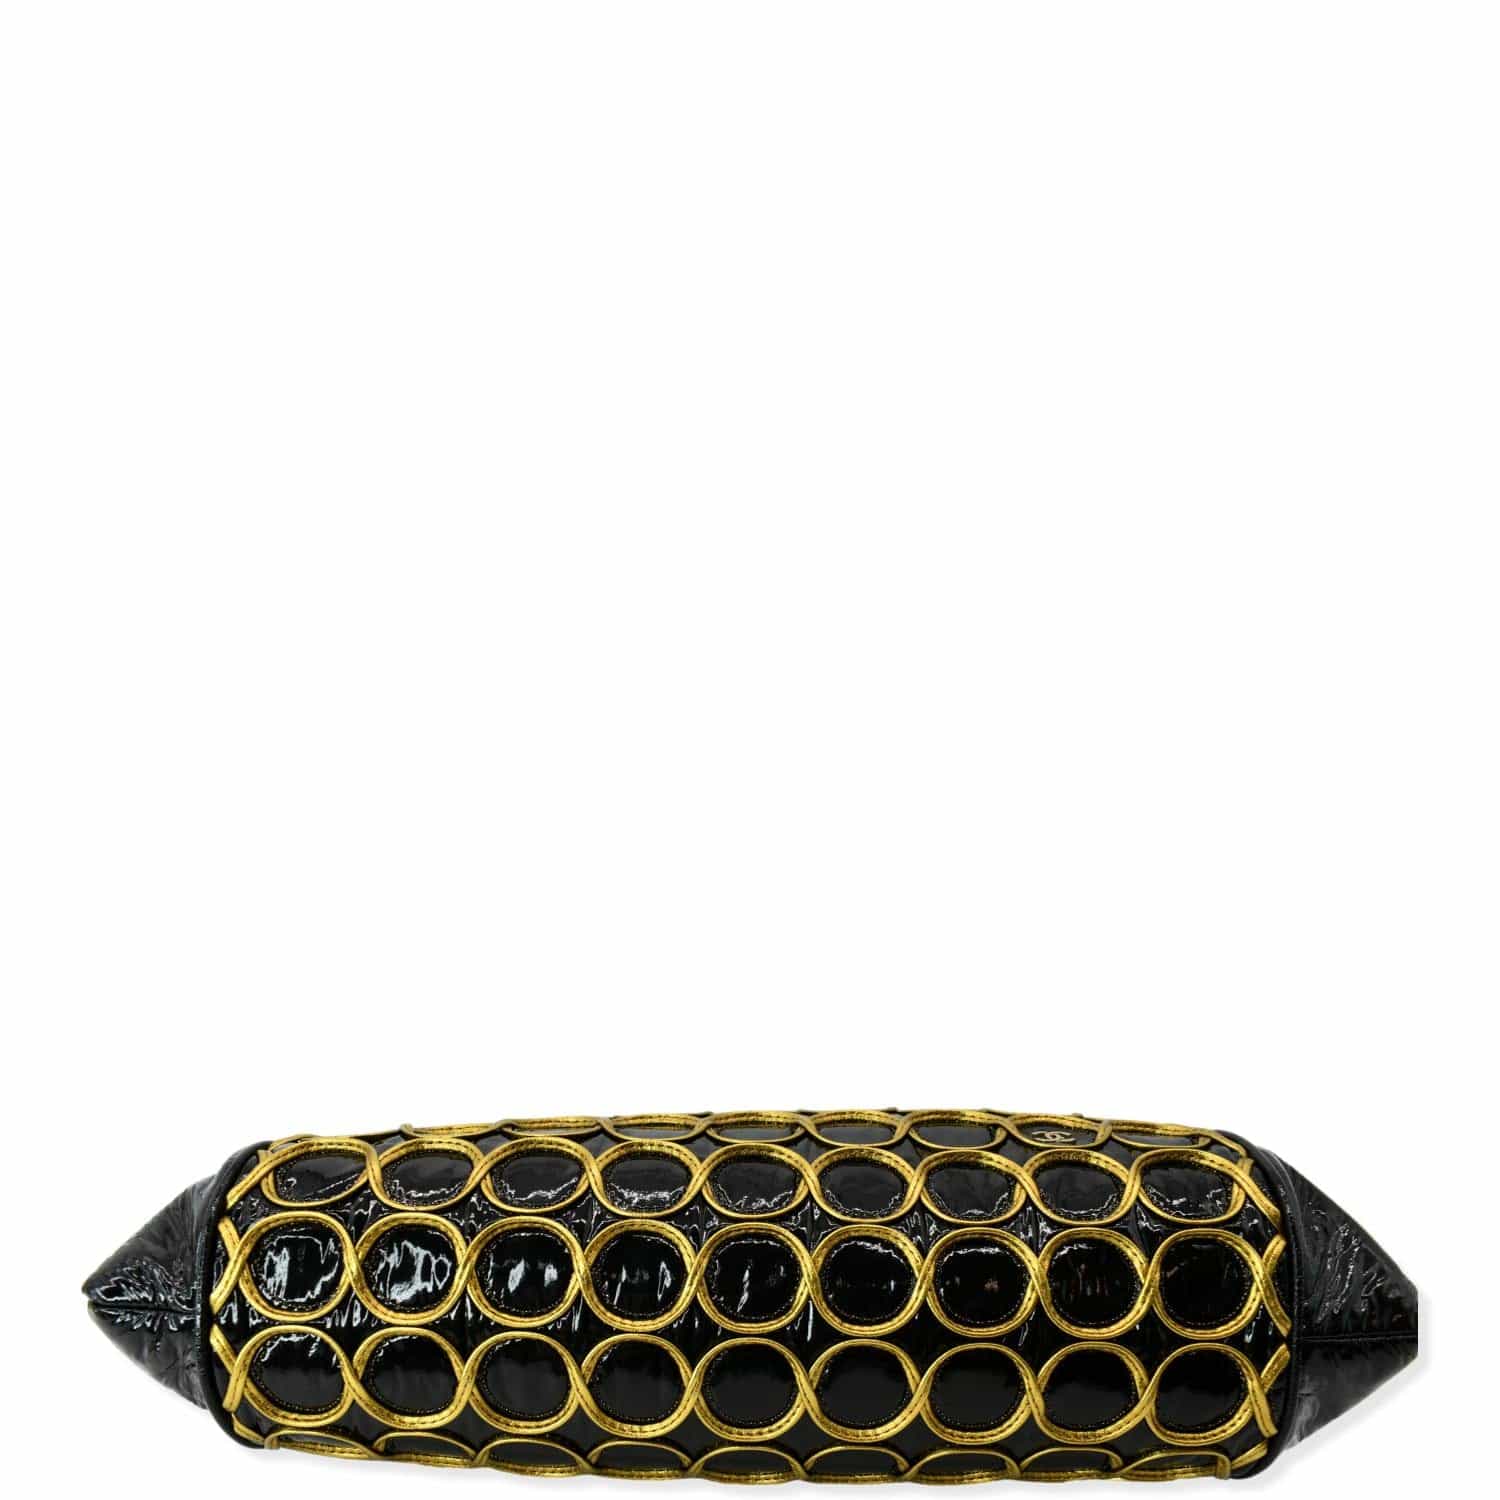 Chanel CC Gold Embroidered Chain Clutch/Shoulder Bag